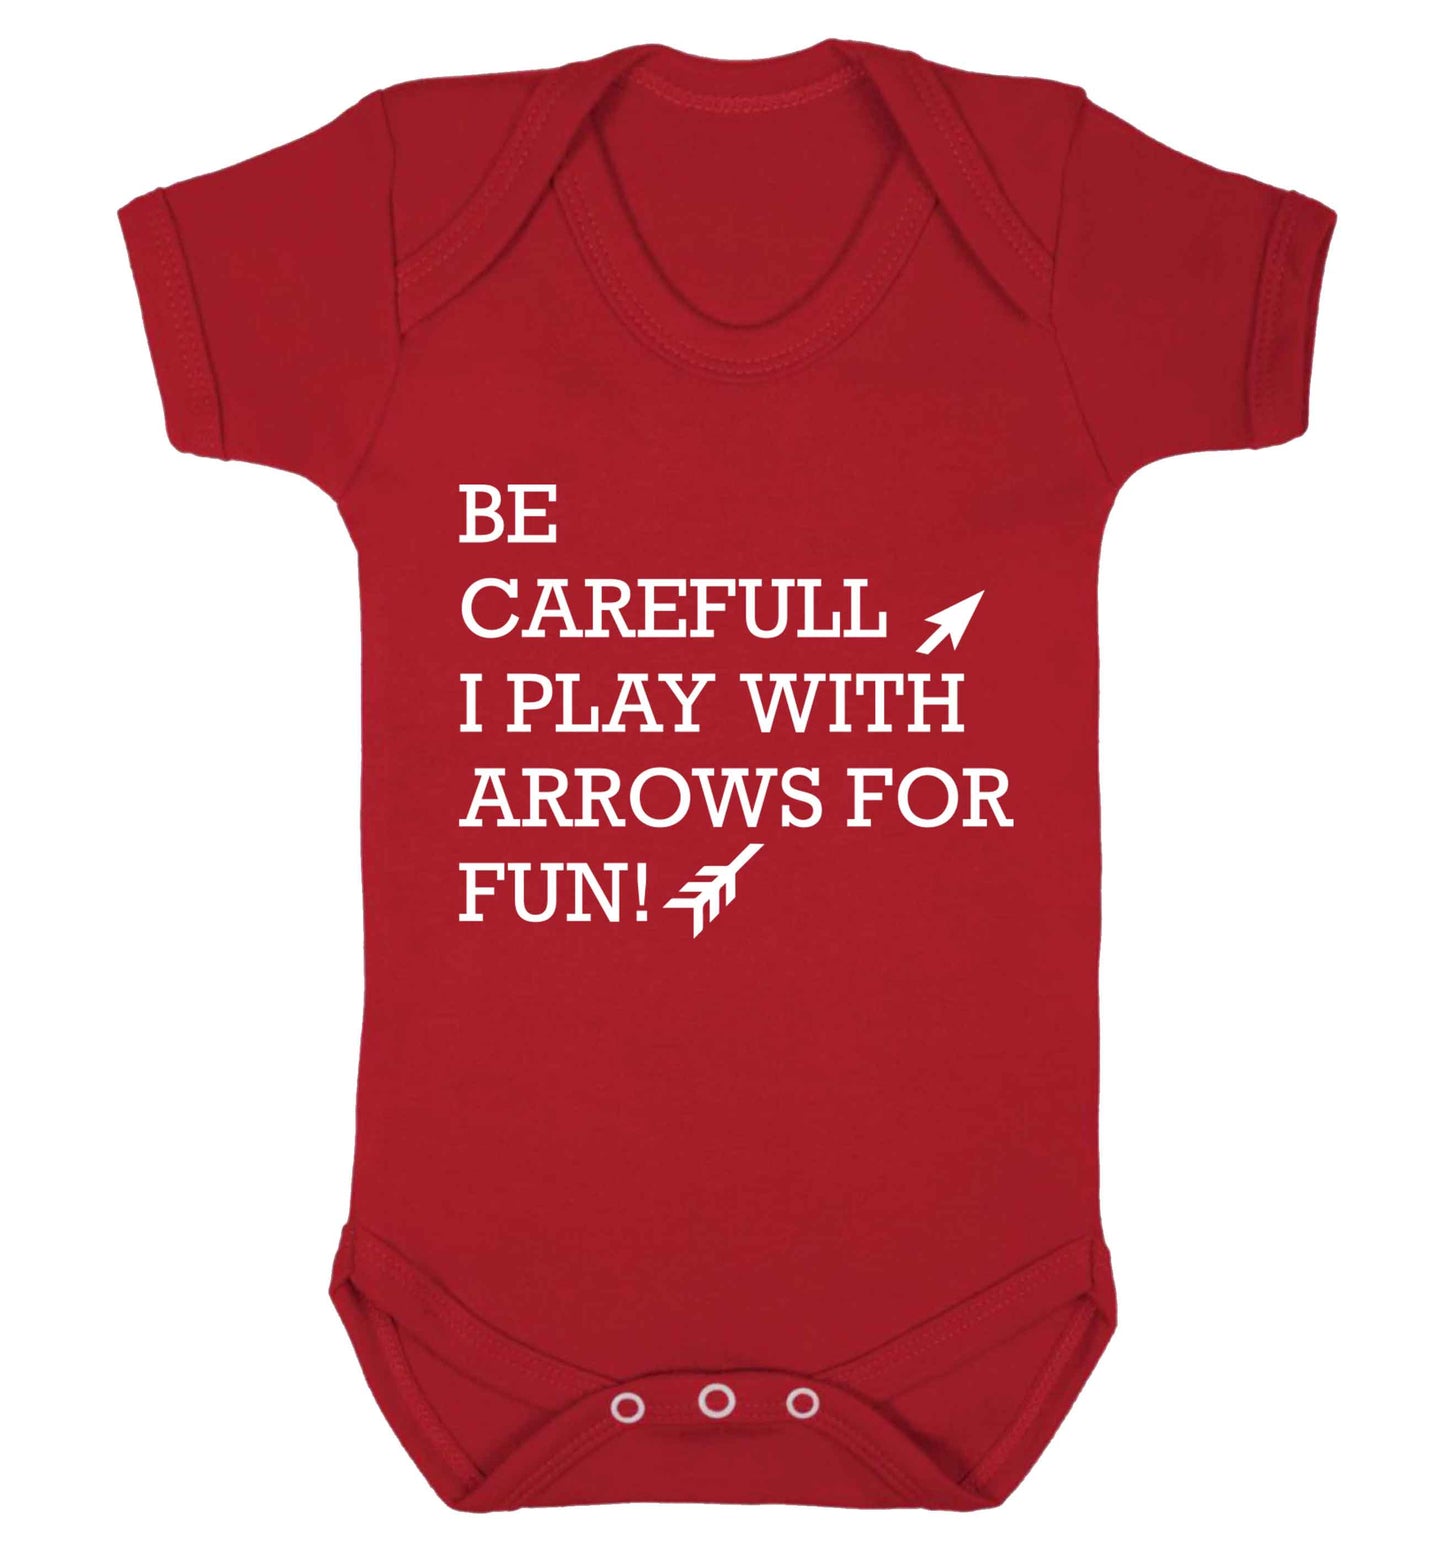 Be carefull I play with arrows for fun Baby Vest red 18-24 months